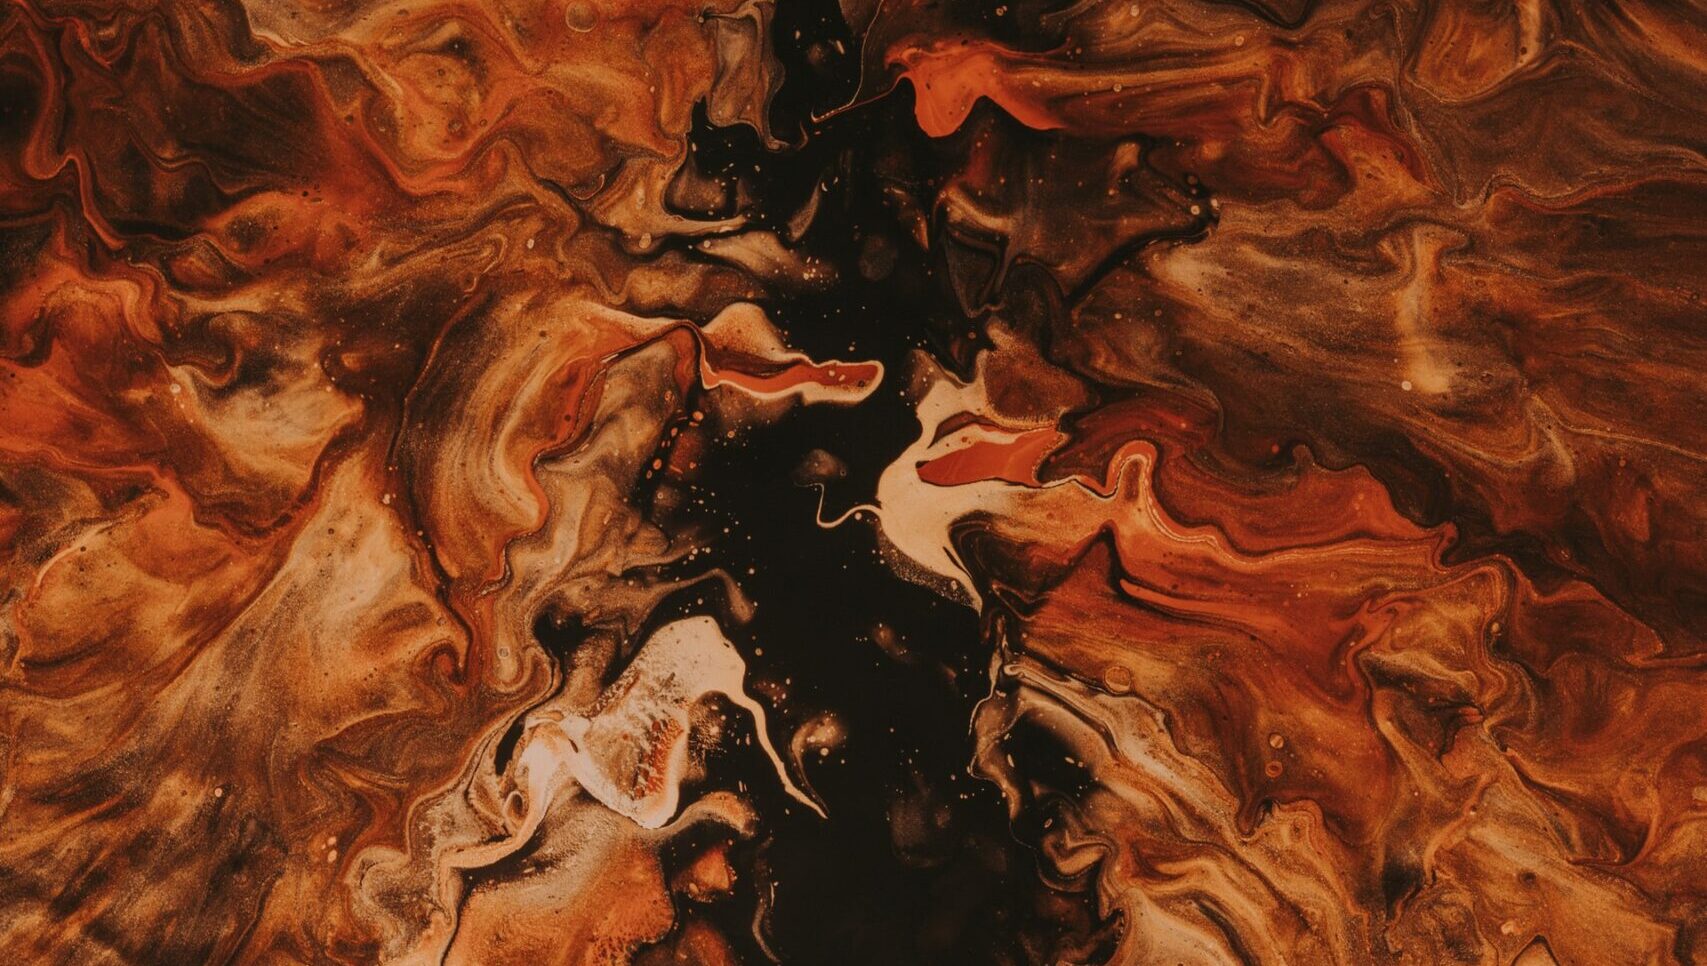 An abstract depiction of fire.